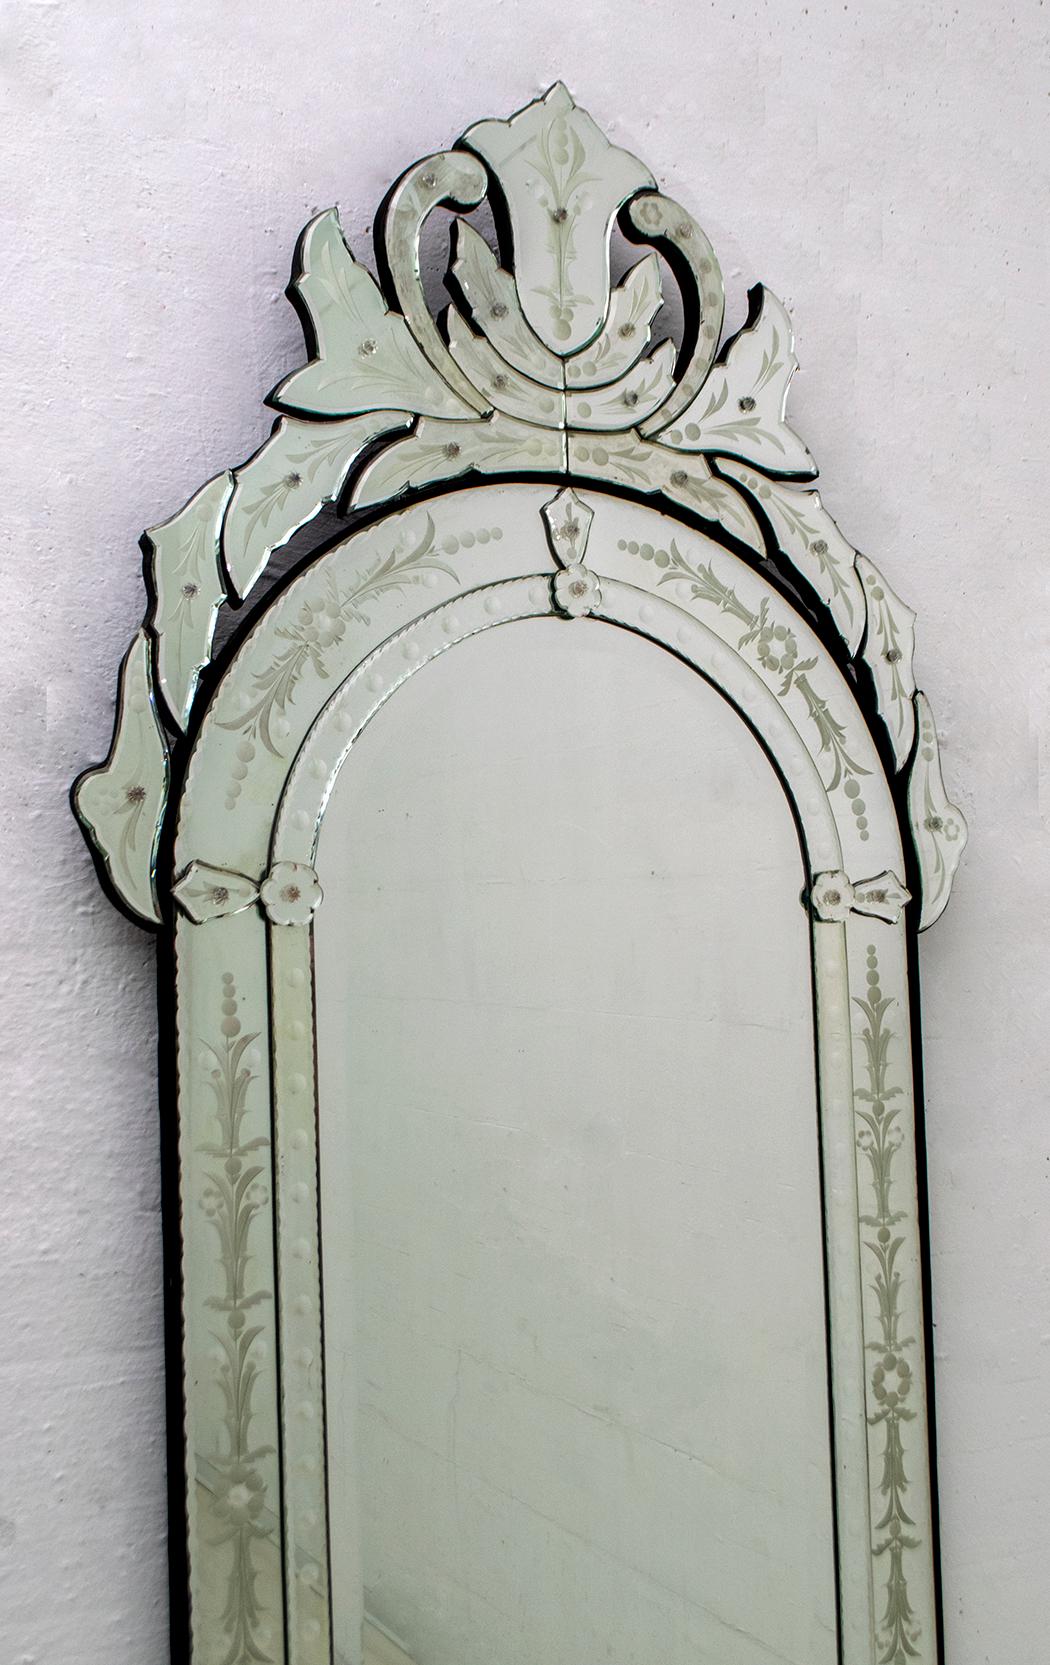 This elegant Mid-Century modern Venetian mirror was made in Italy, circa 1950. It features a cartouche shape with an arched panel and ground mirror in the center. There is a beveled chain around the edges and foliate details throughout. The top of